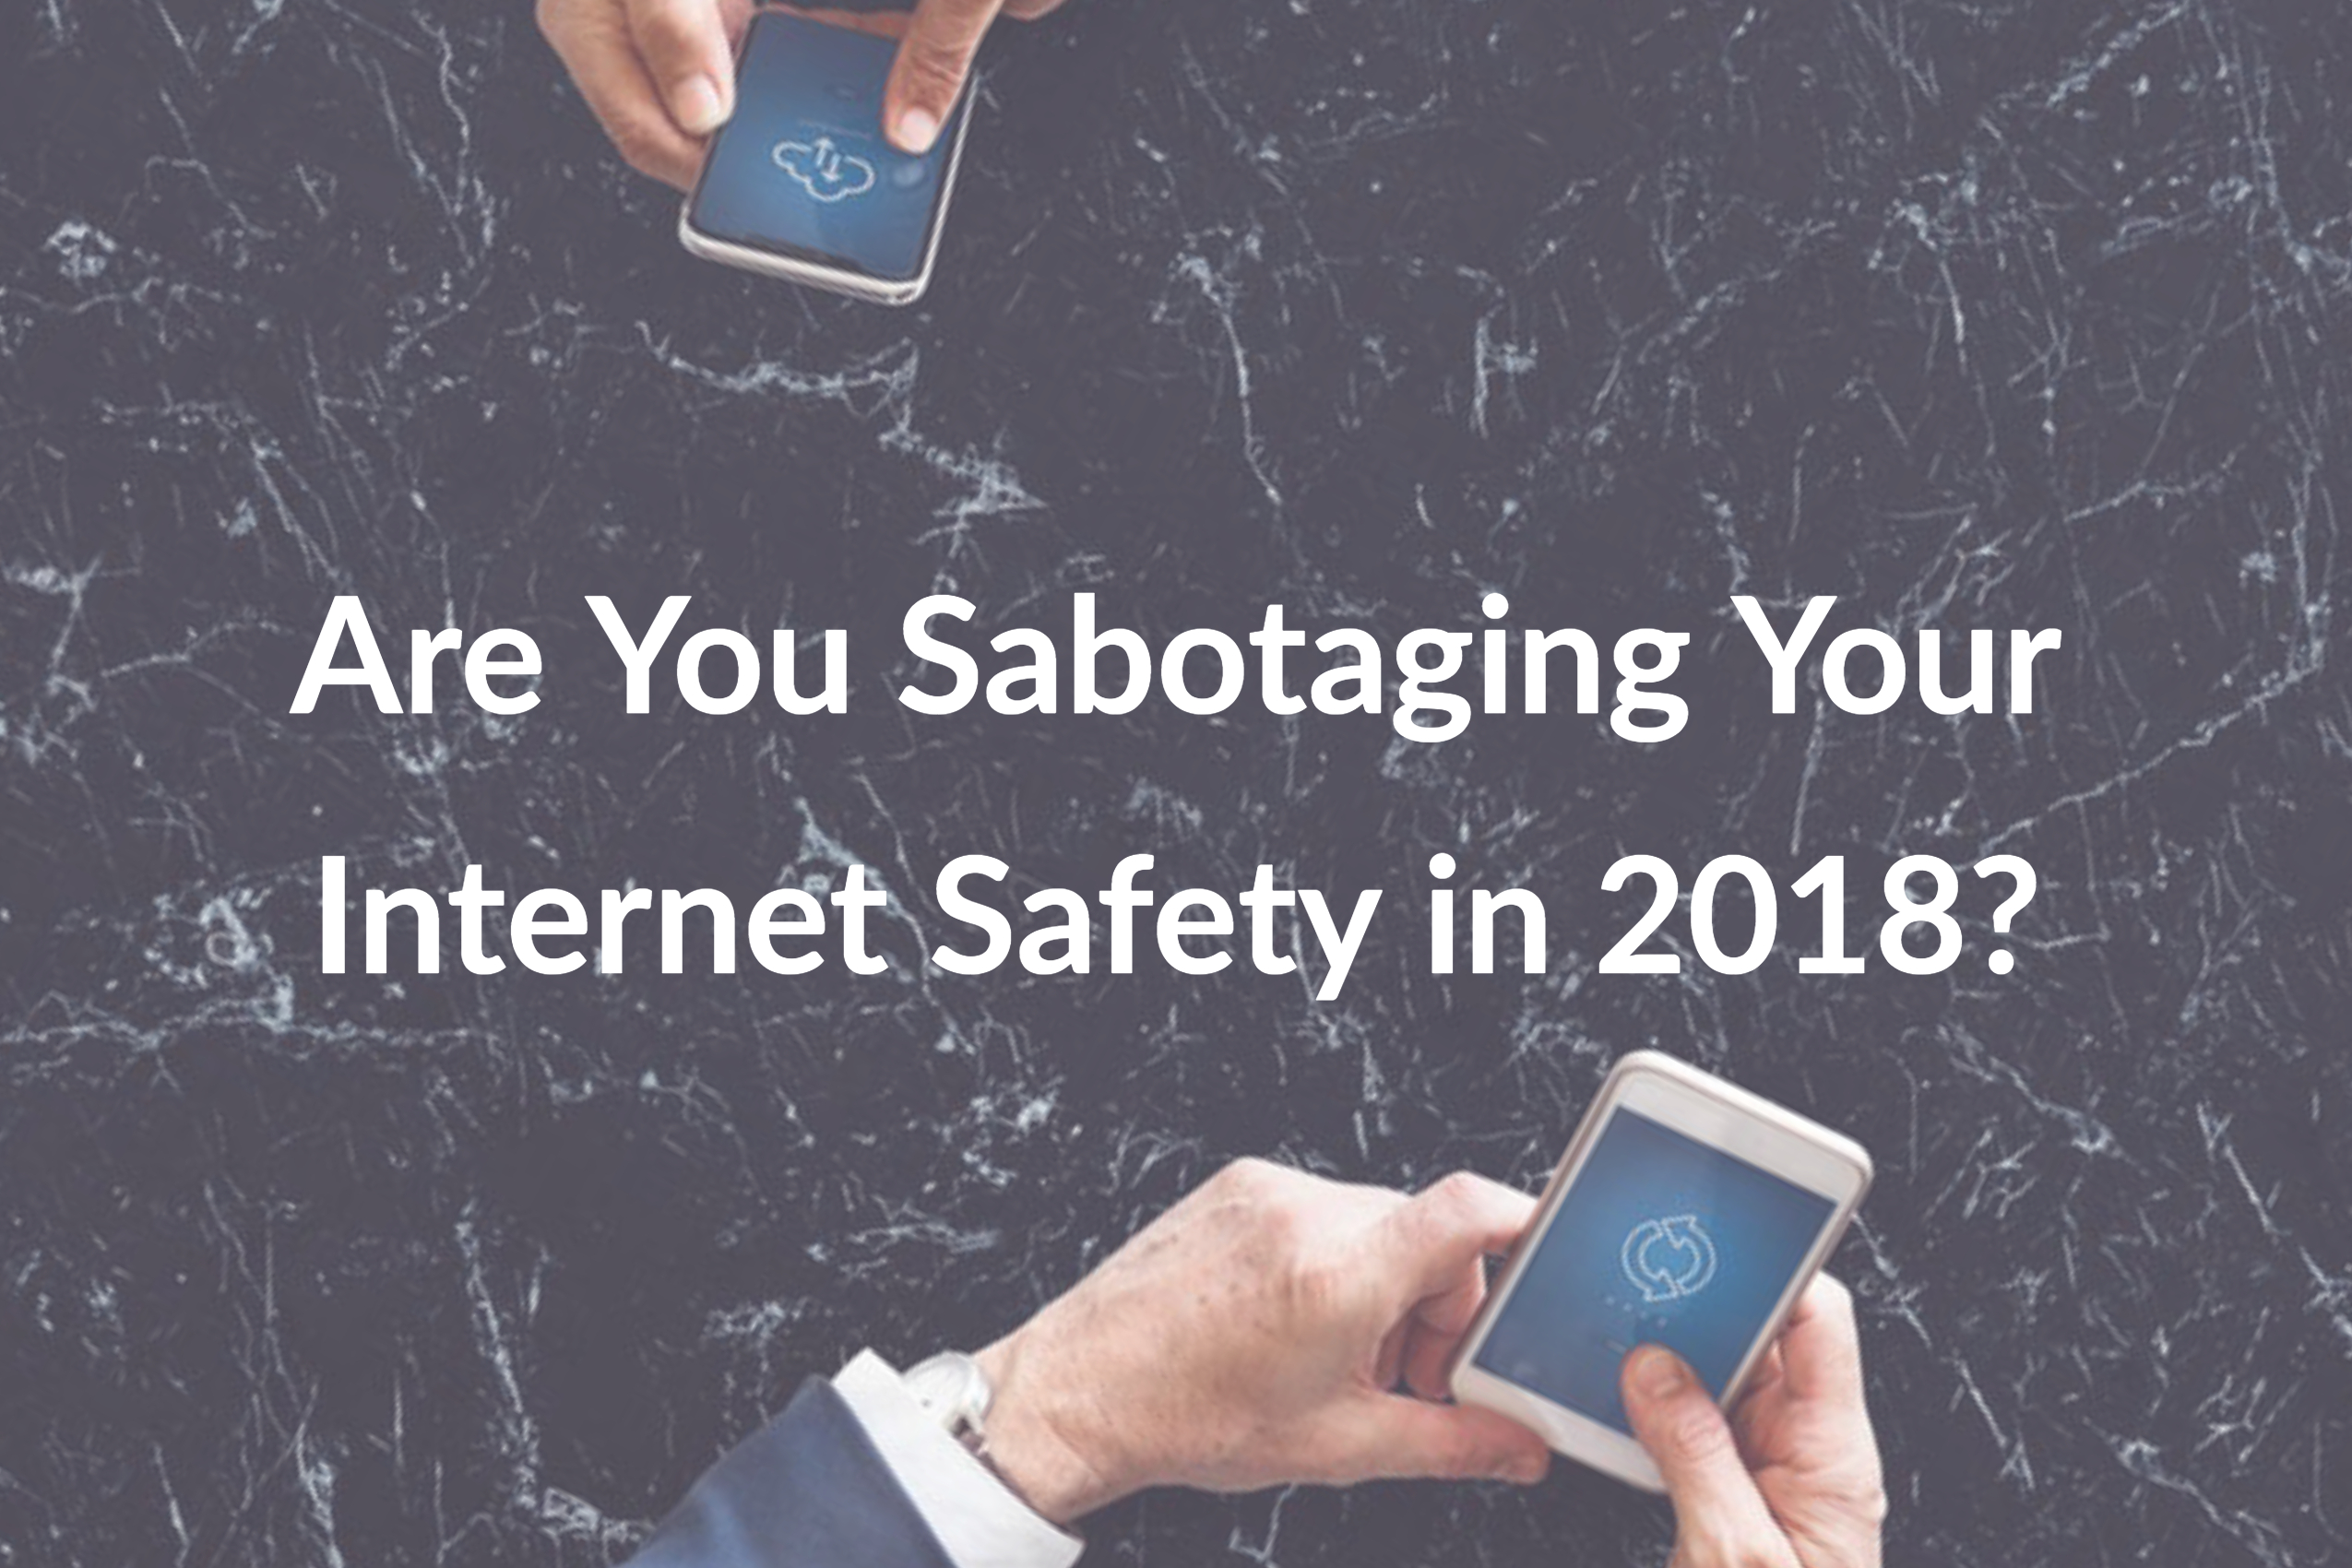 Are You Sabotaging Your Internet Safety in 2018?